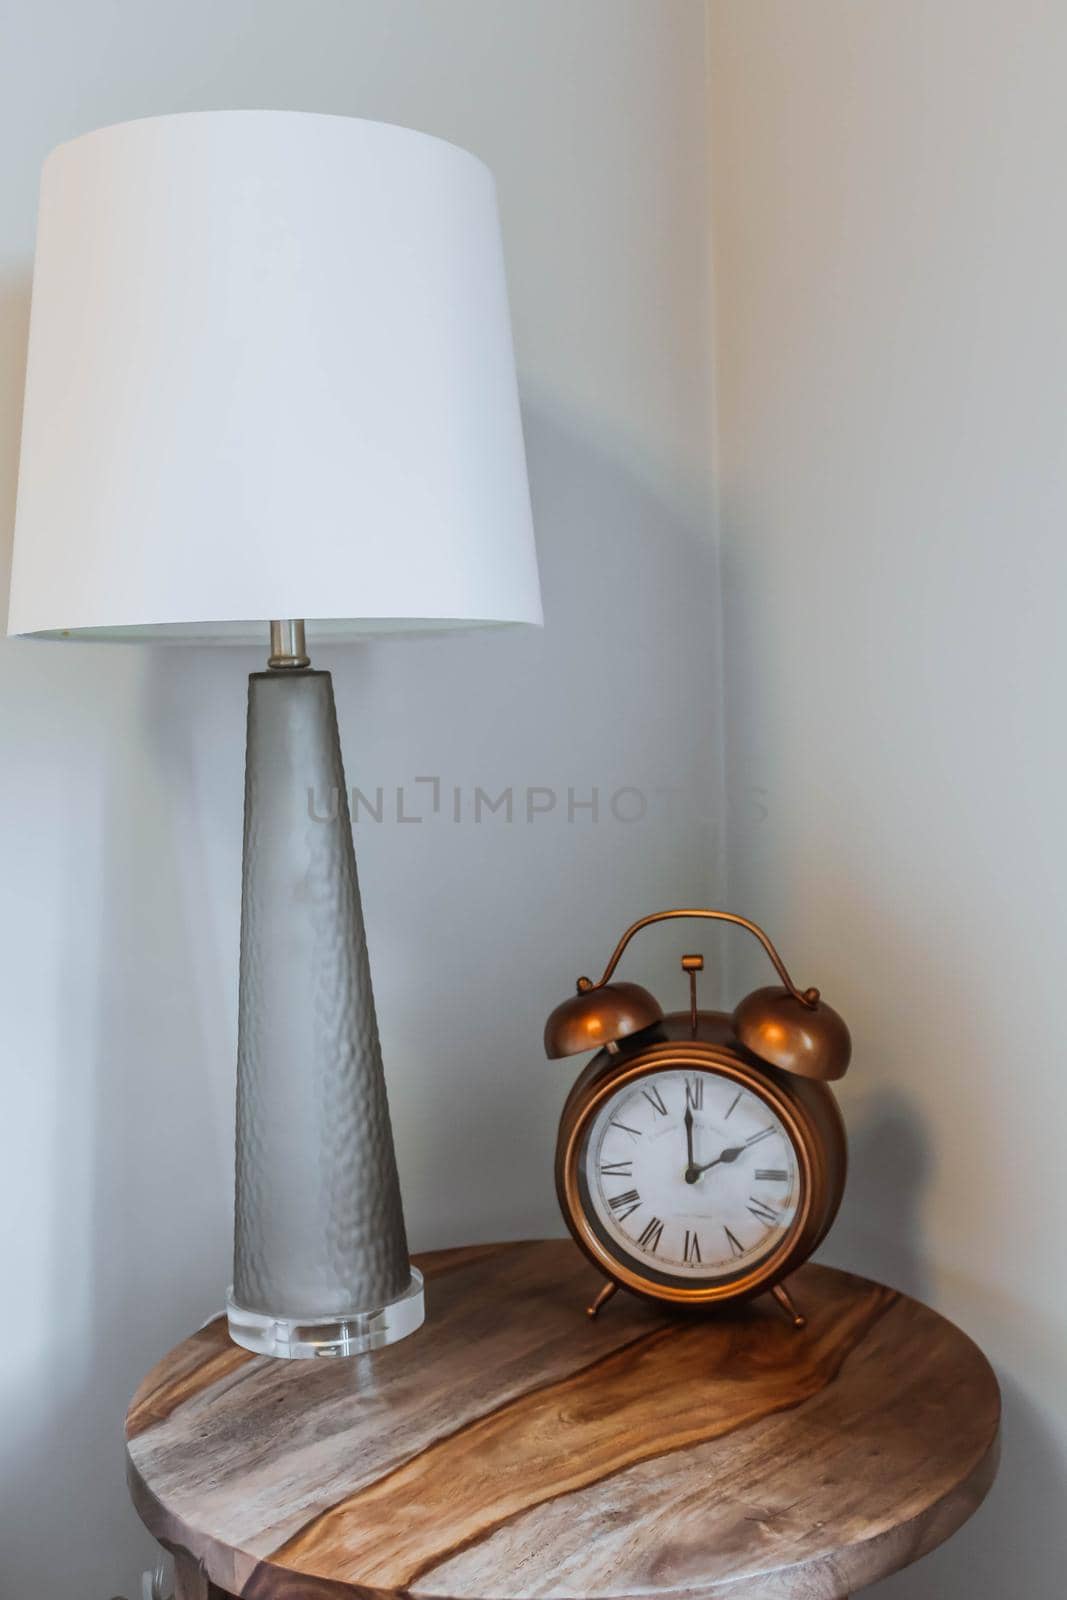 Alarm Clock and Reading Lamp on Bedside Table. Copy Past text